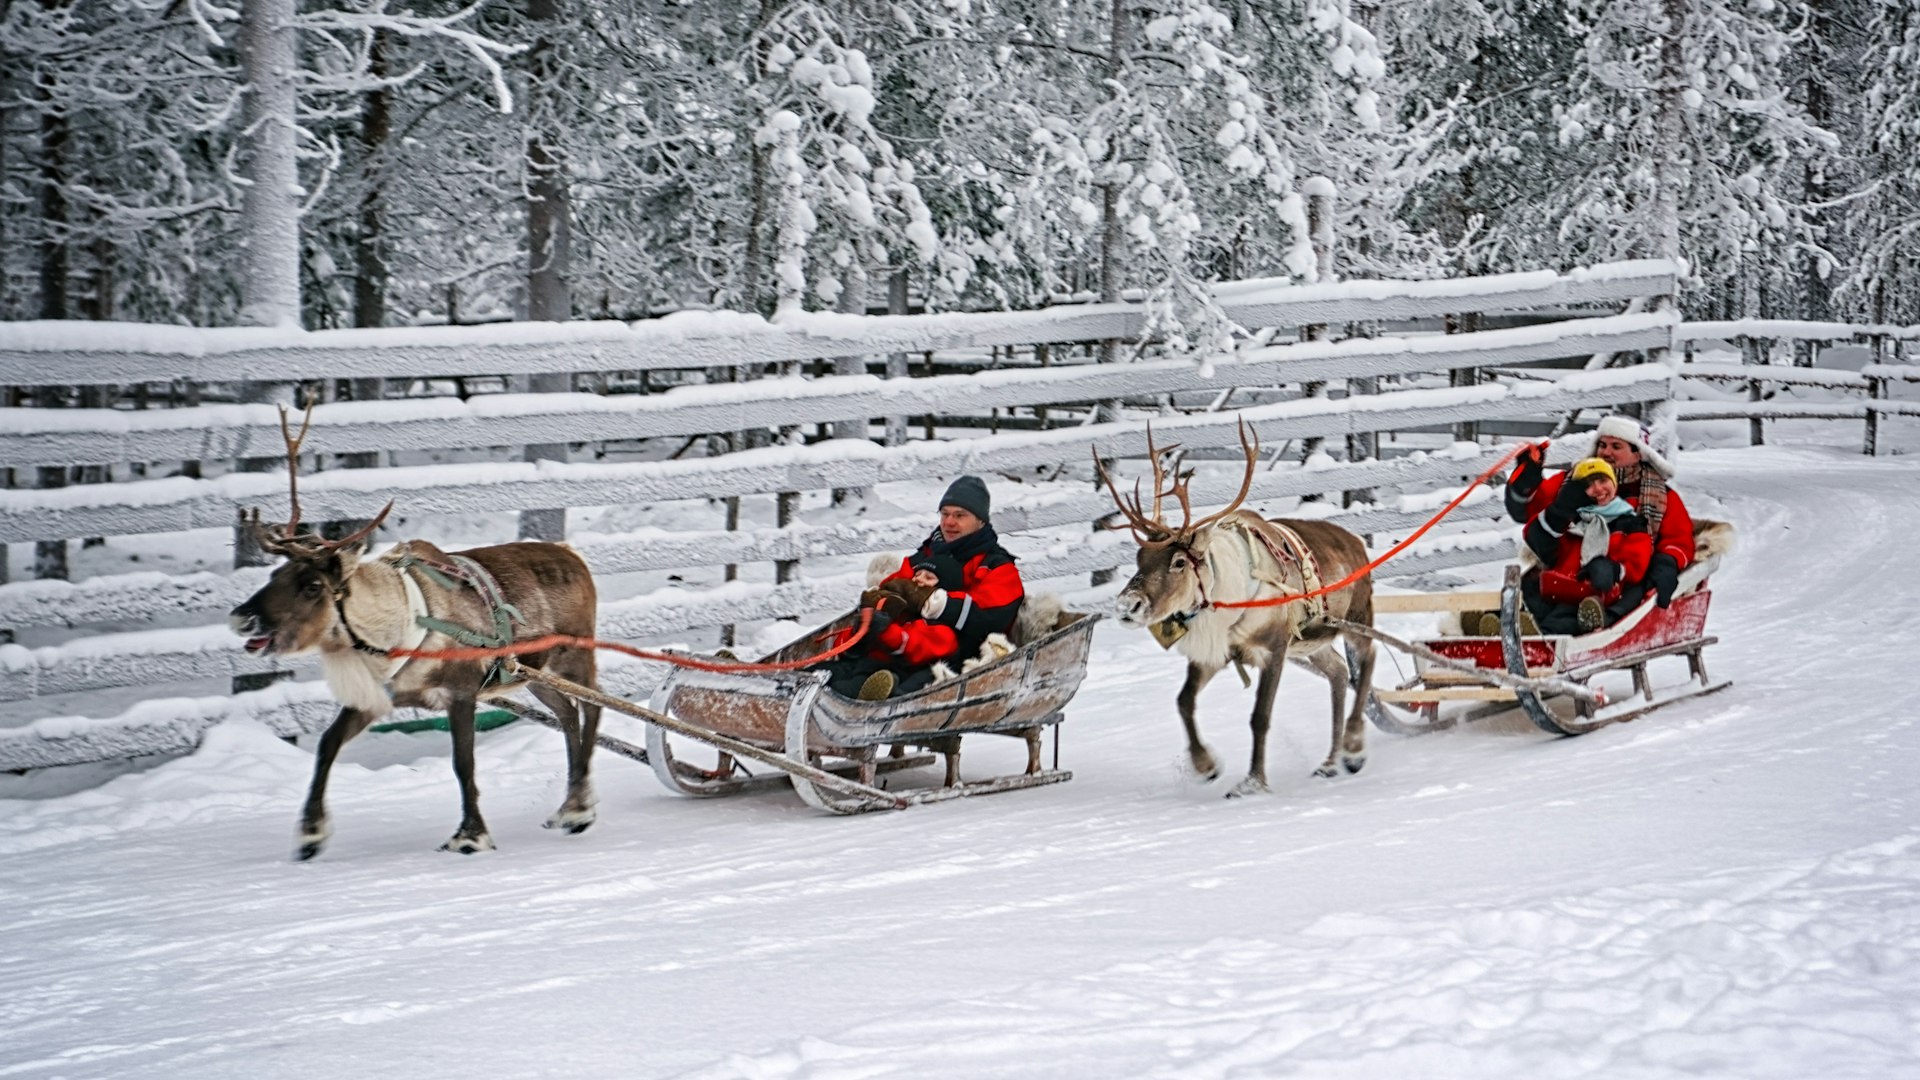 Two sleds pulled by reindeer through a snowy landscape. There is an adult and a child in the back of each sled wearing winter clothing to keep them warm